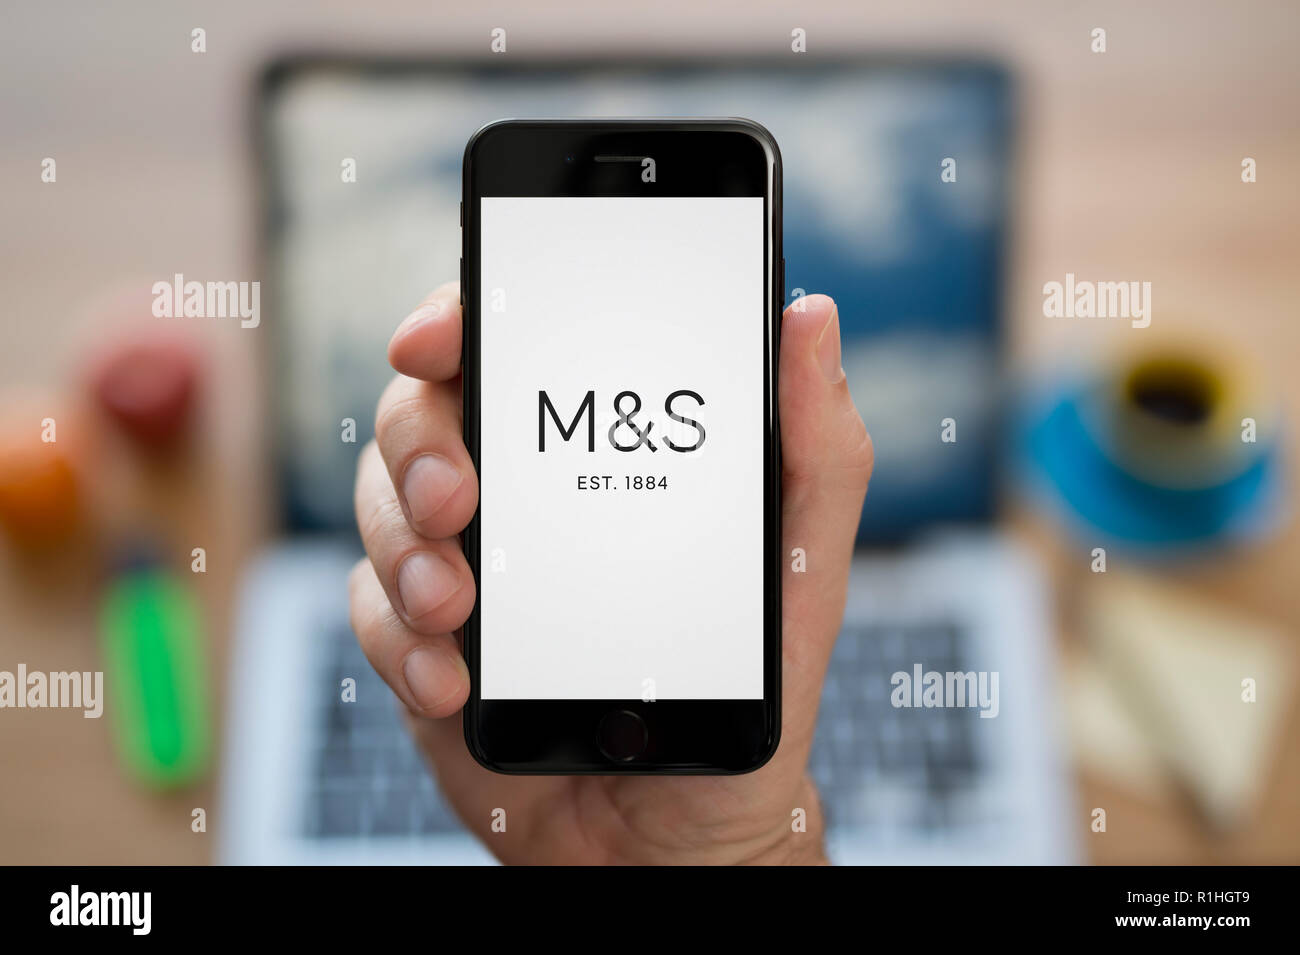 A man looks at his iPhone which displays the M&S logo, while sat at his computer desk (Editorial use only). Stock Photo